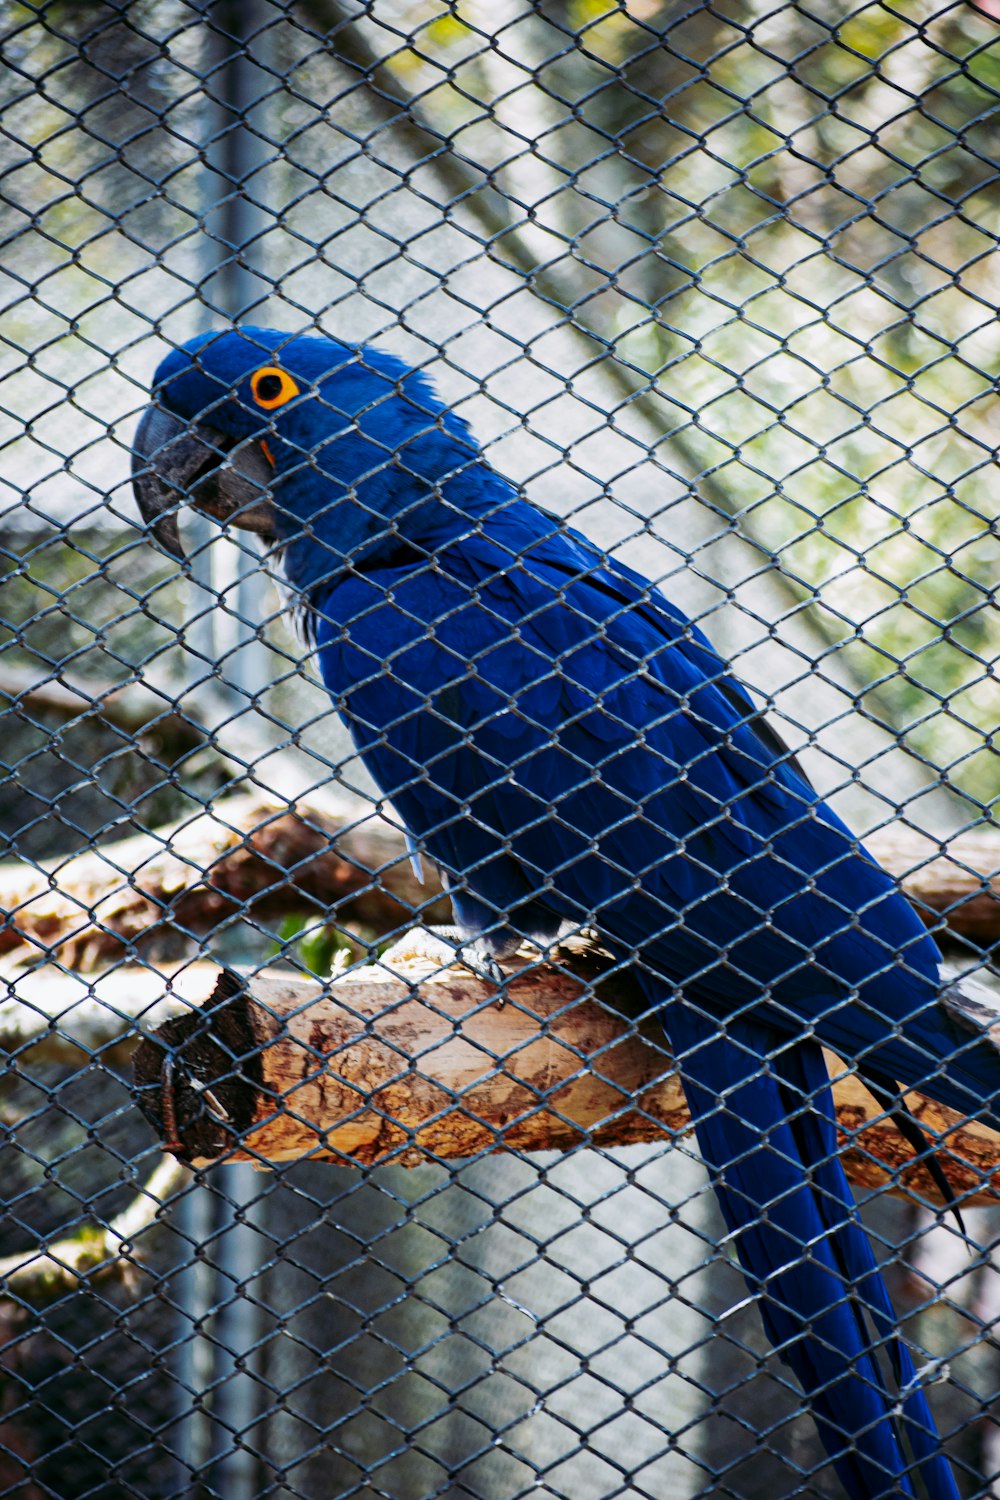 a blue parrot sitting on top of a tree branch